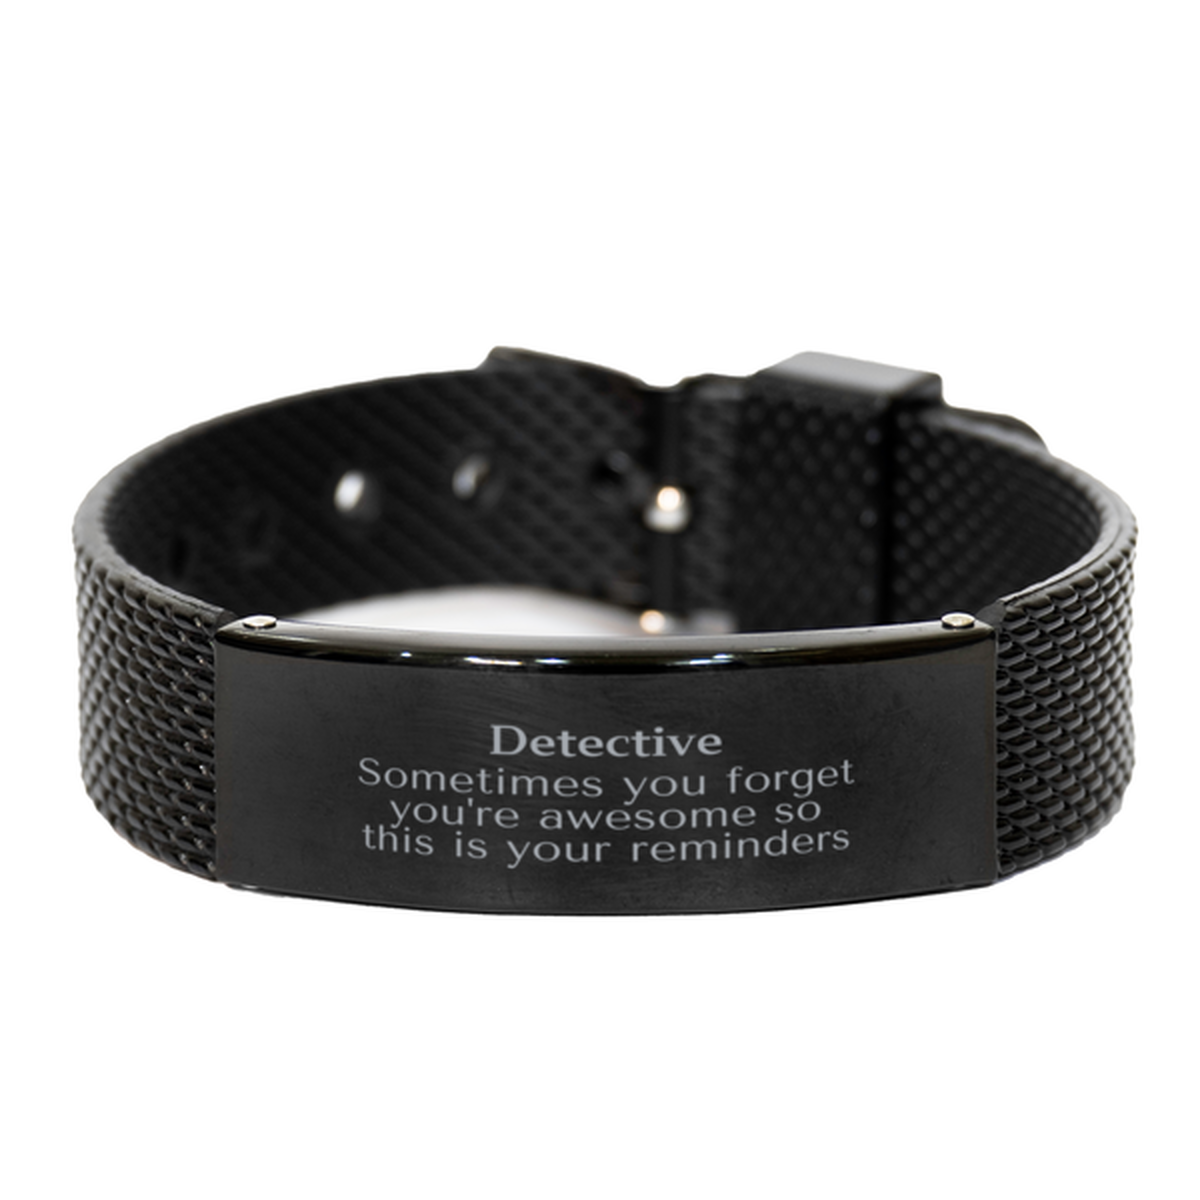 Sentimental Detective Black Shark Mesh Bracelet, Detective Sometimes you forget you're awesome so this is your reminders, Graduation Christmas Birthday Gifts for Detective, Men, Women, Coworkers